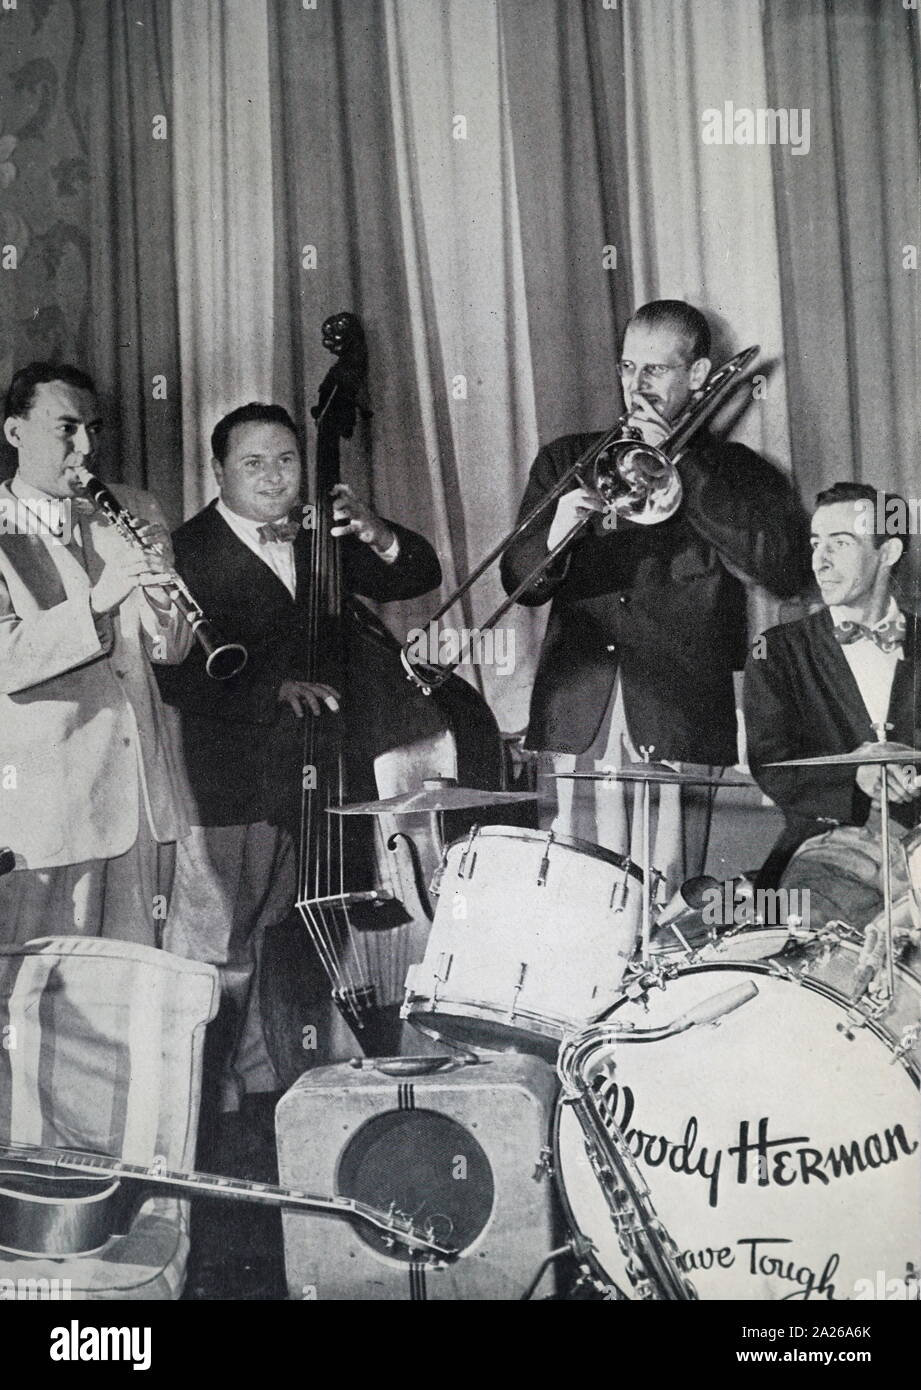 photograph showing four members of the Woody Herman Orchestra.1945. L. to R.: Woody Herman, Chubby Jackson. Bill Harris, Dave Tough Stock Photo